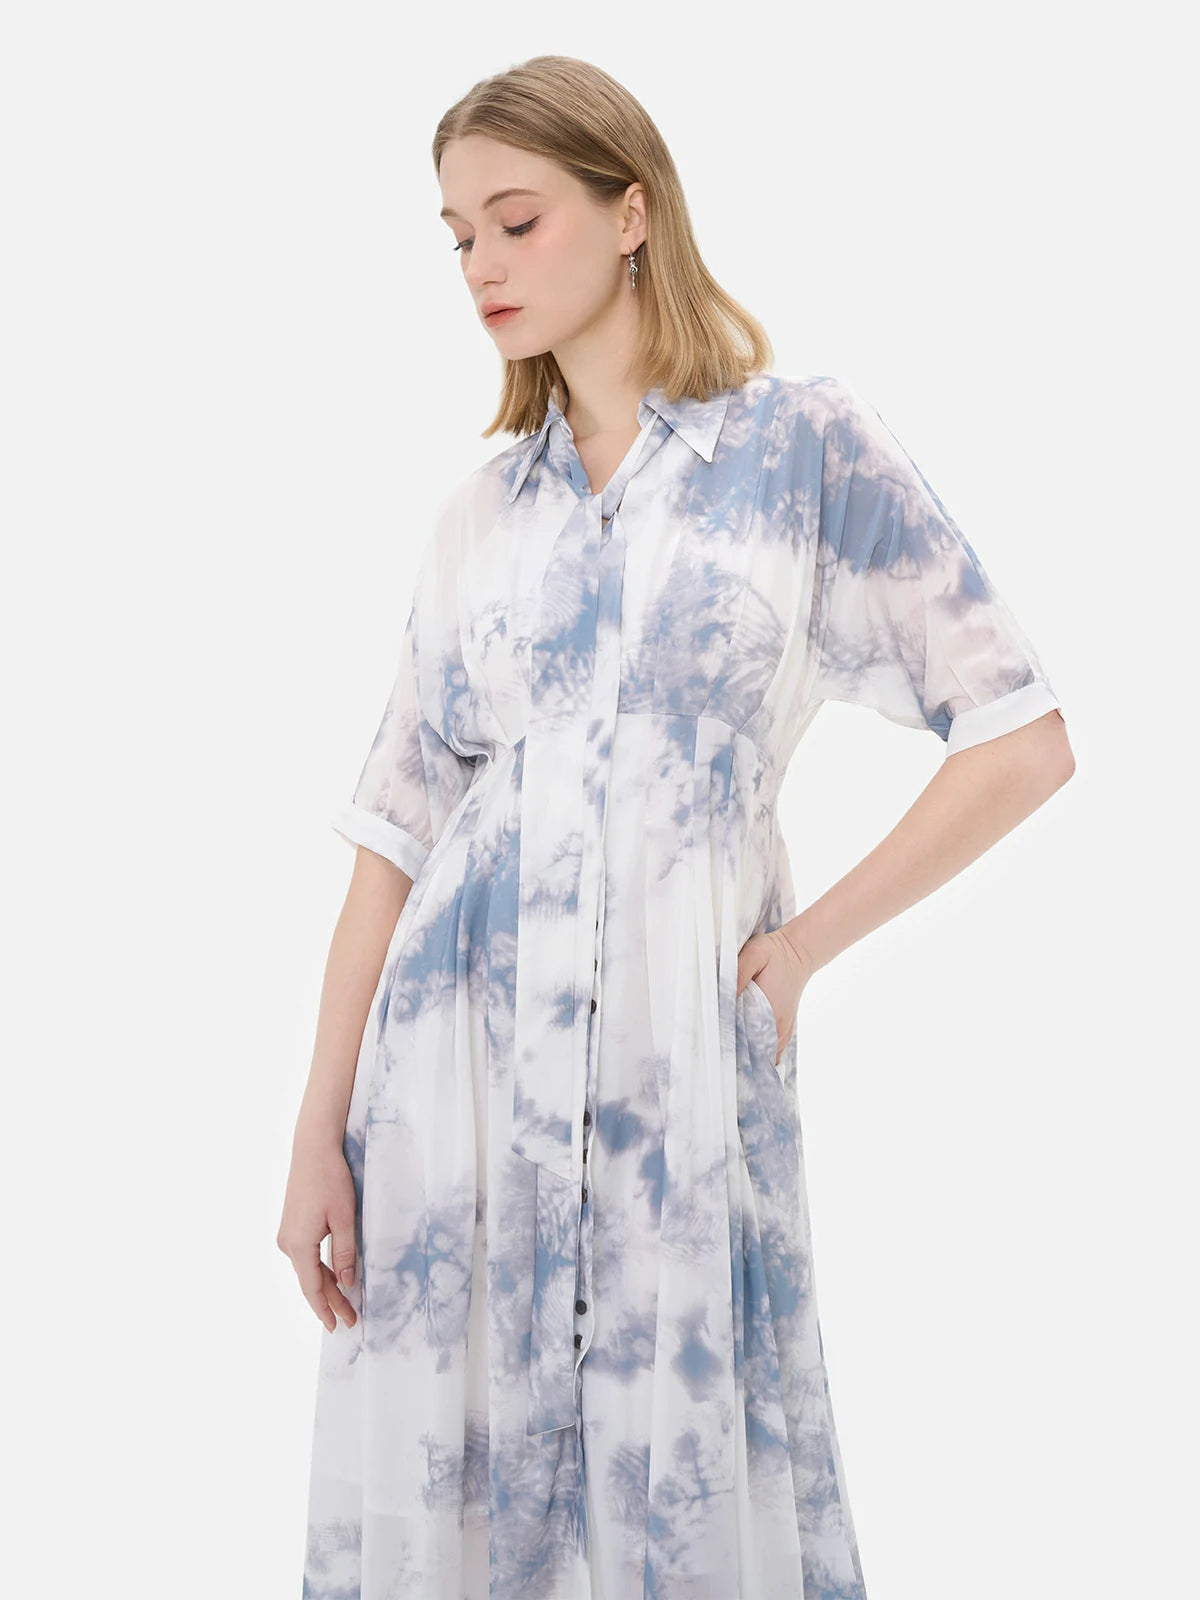 Unique ink wash blurring print design on a collared dress, blending classic and contemporary styles